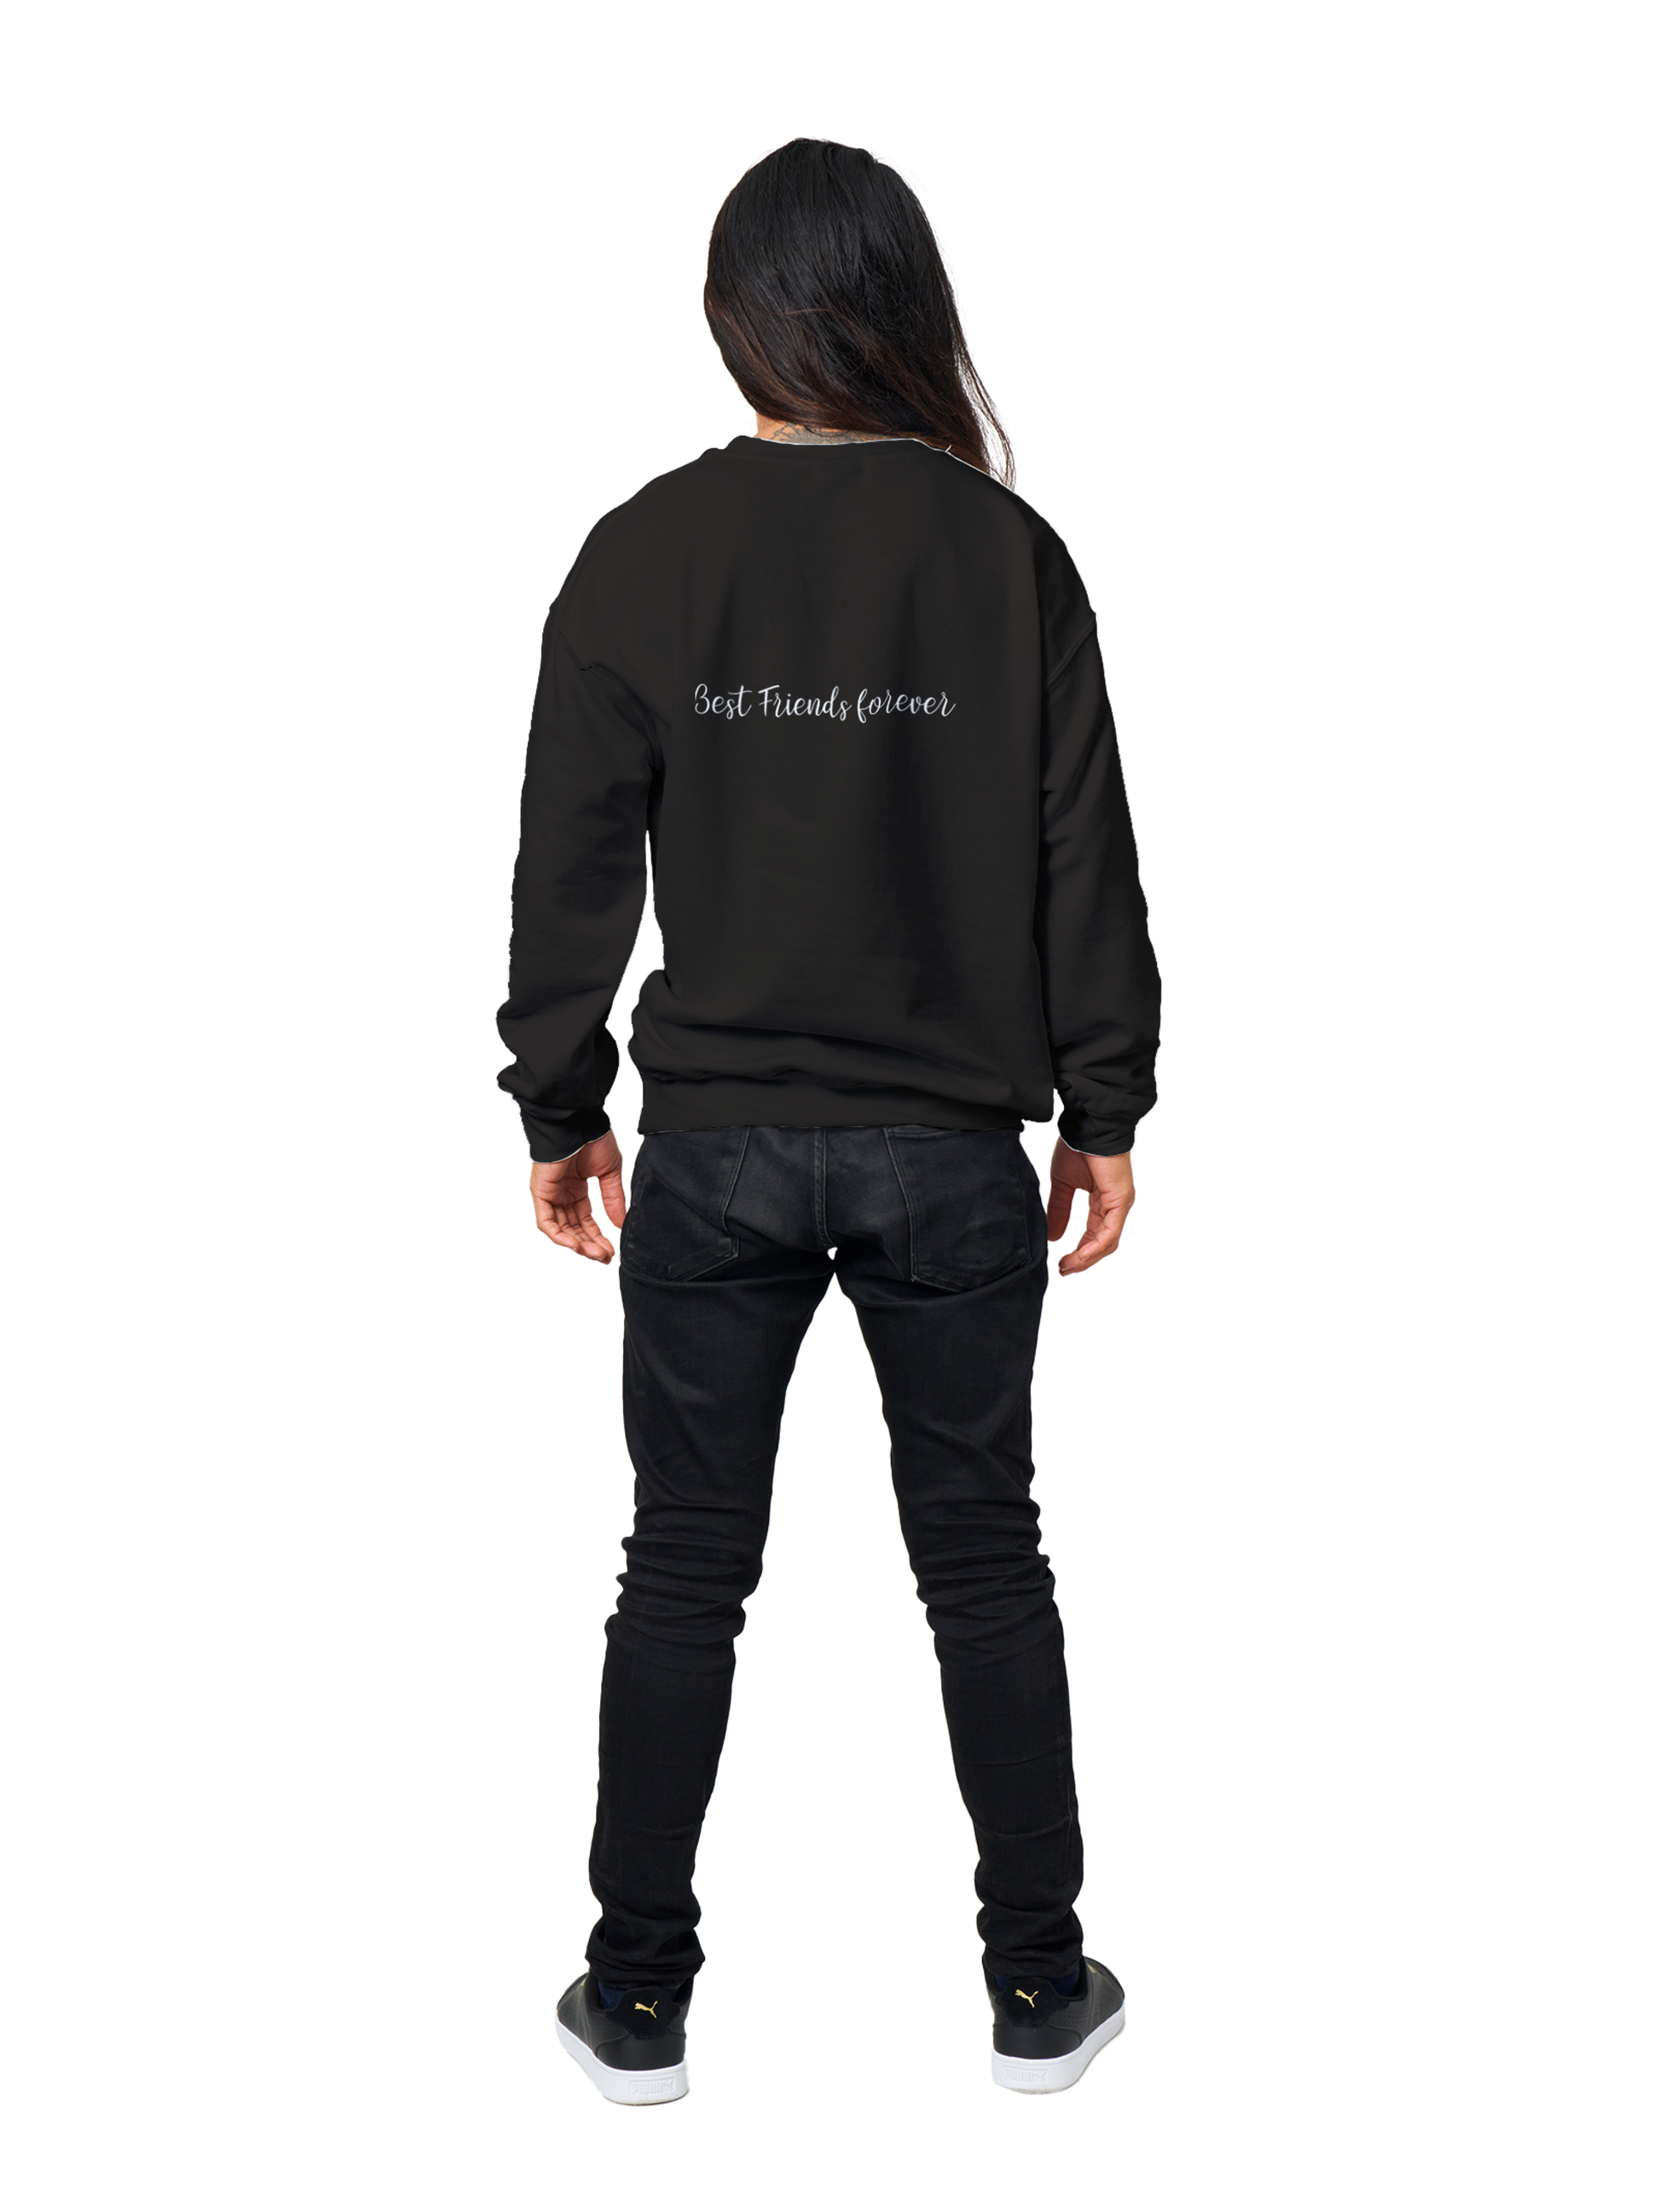 Hand Drawn Horse || Unisex Crewneck Sweatshirt - Comic - Personalized; Personalized with your horse